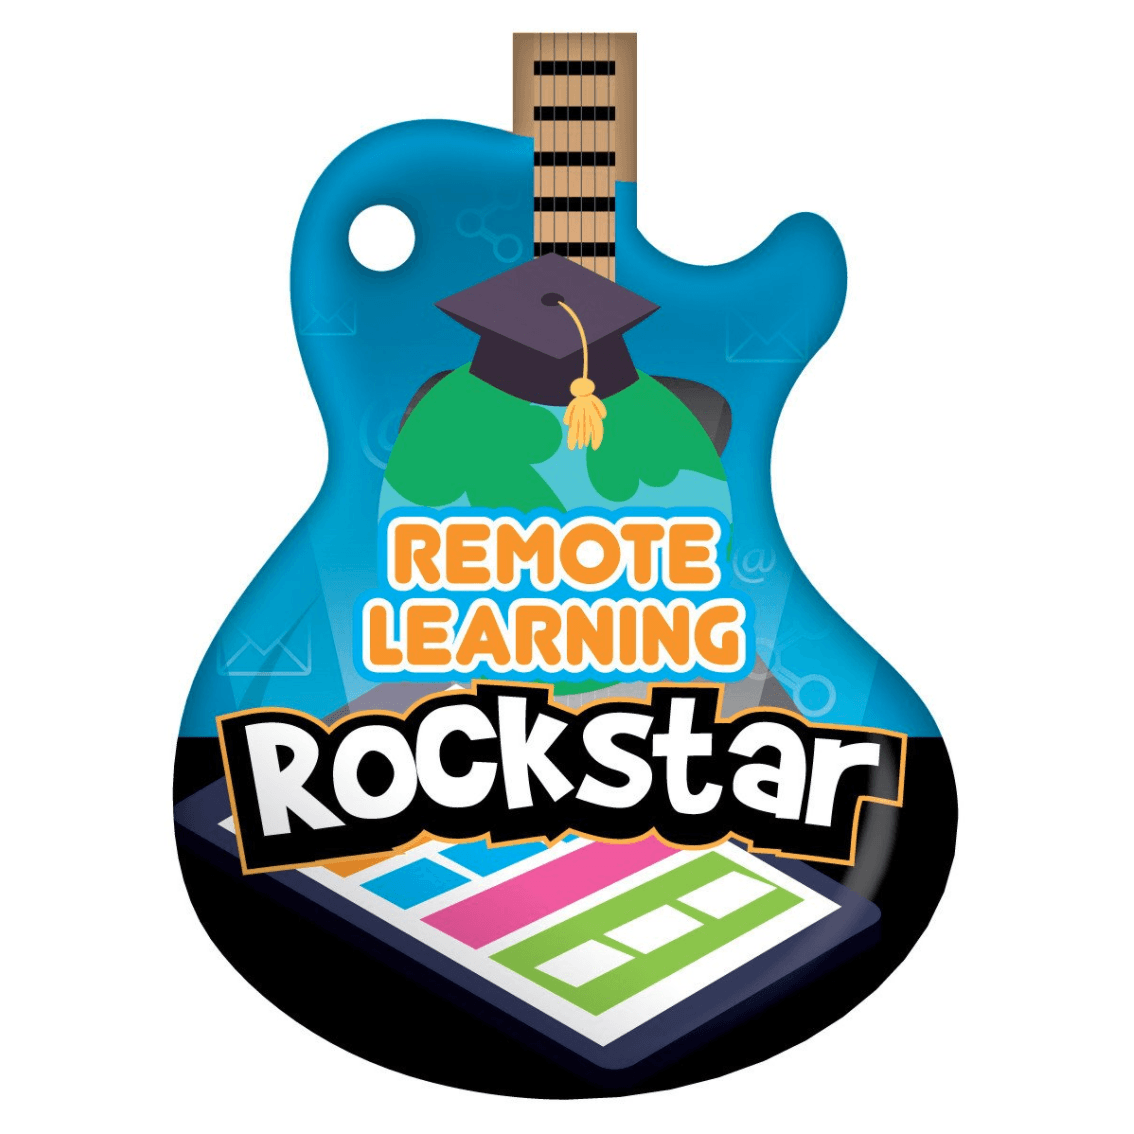 Remote Learning Rockstar Guitar Brag Tags Classroom Rewards - Pack of 10:Primary Classroom Resources